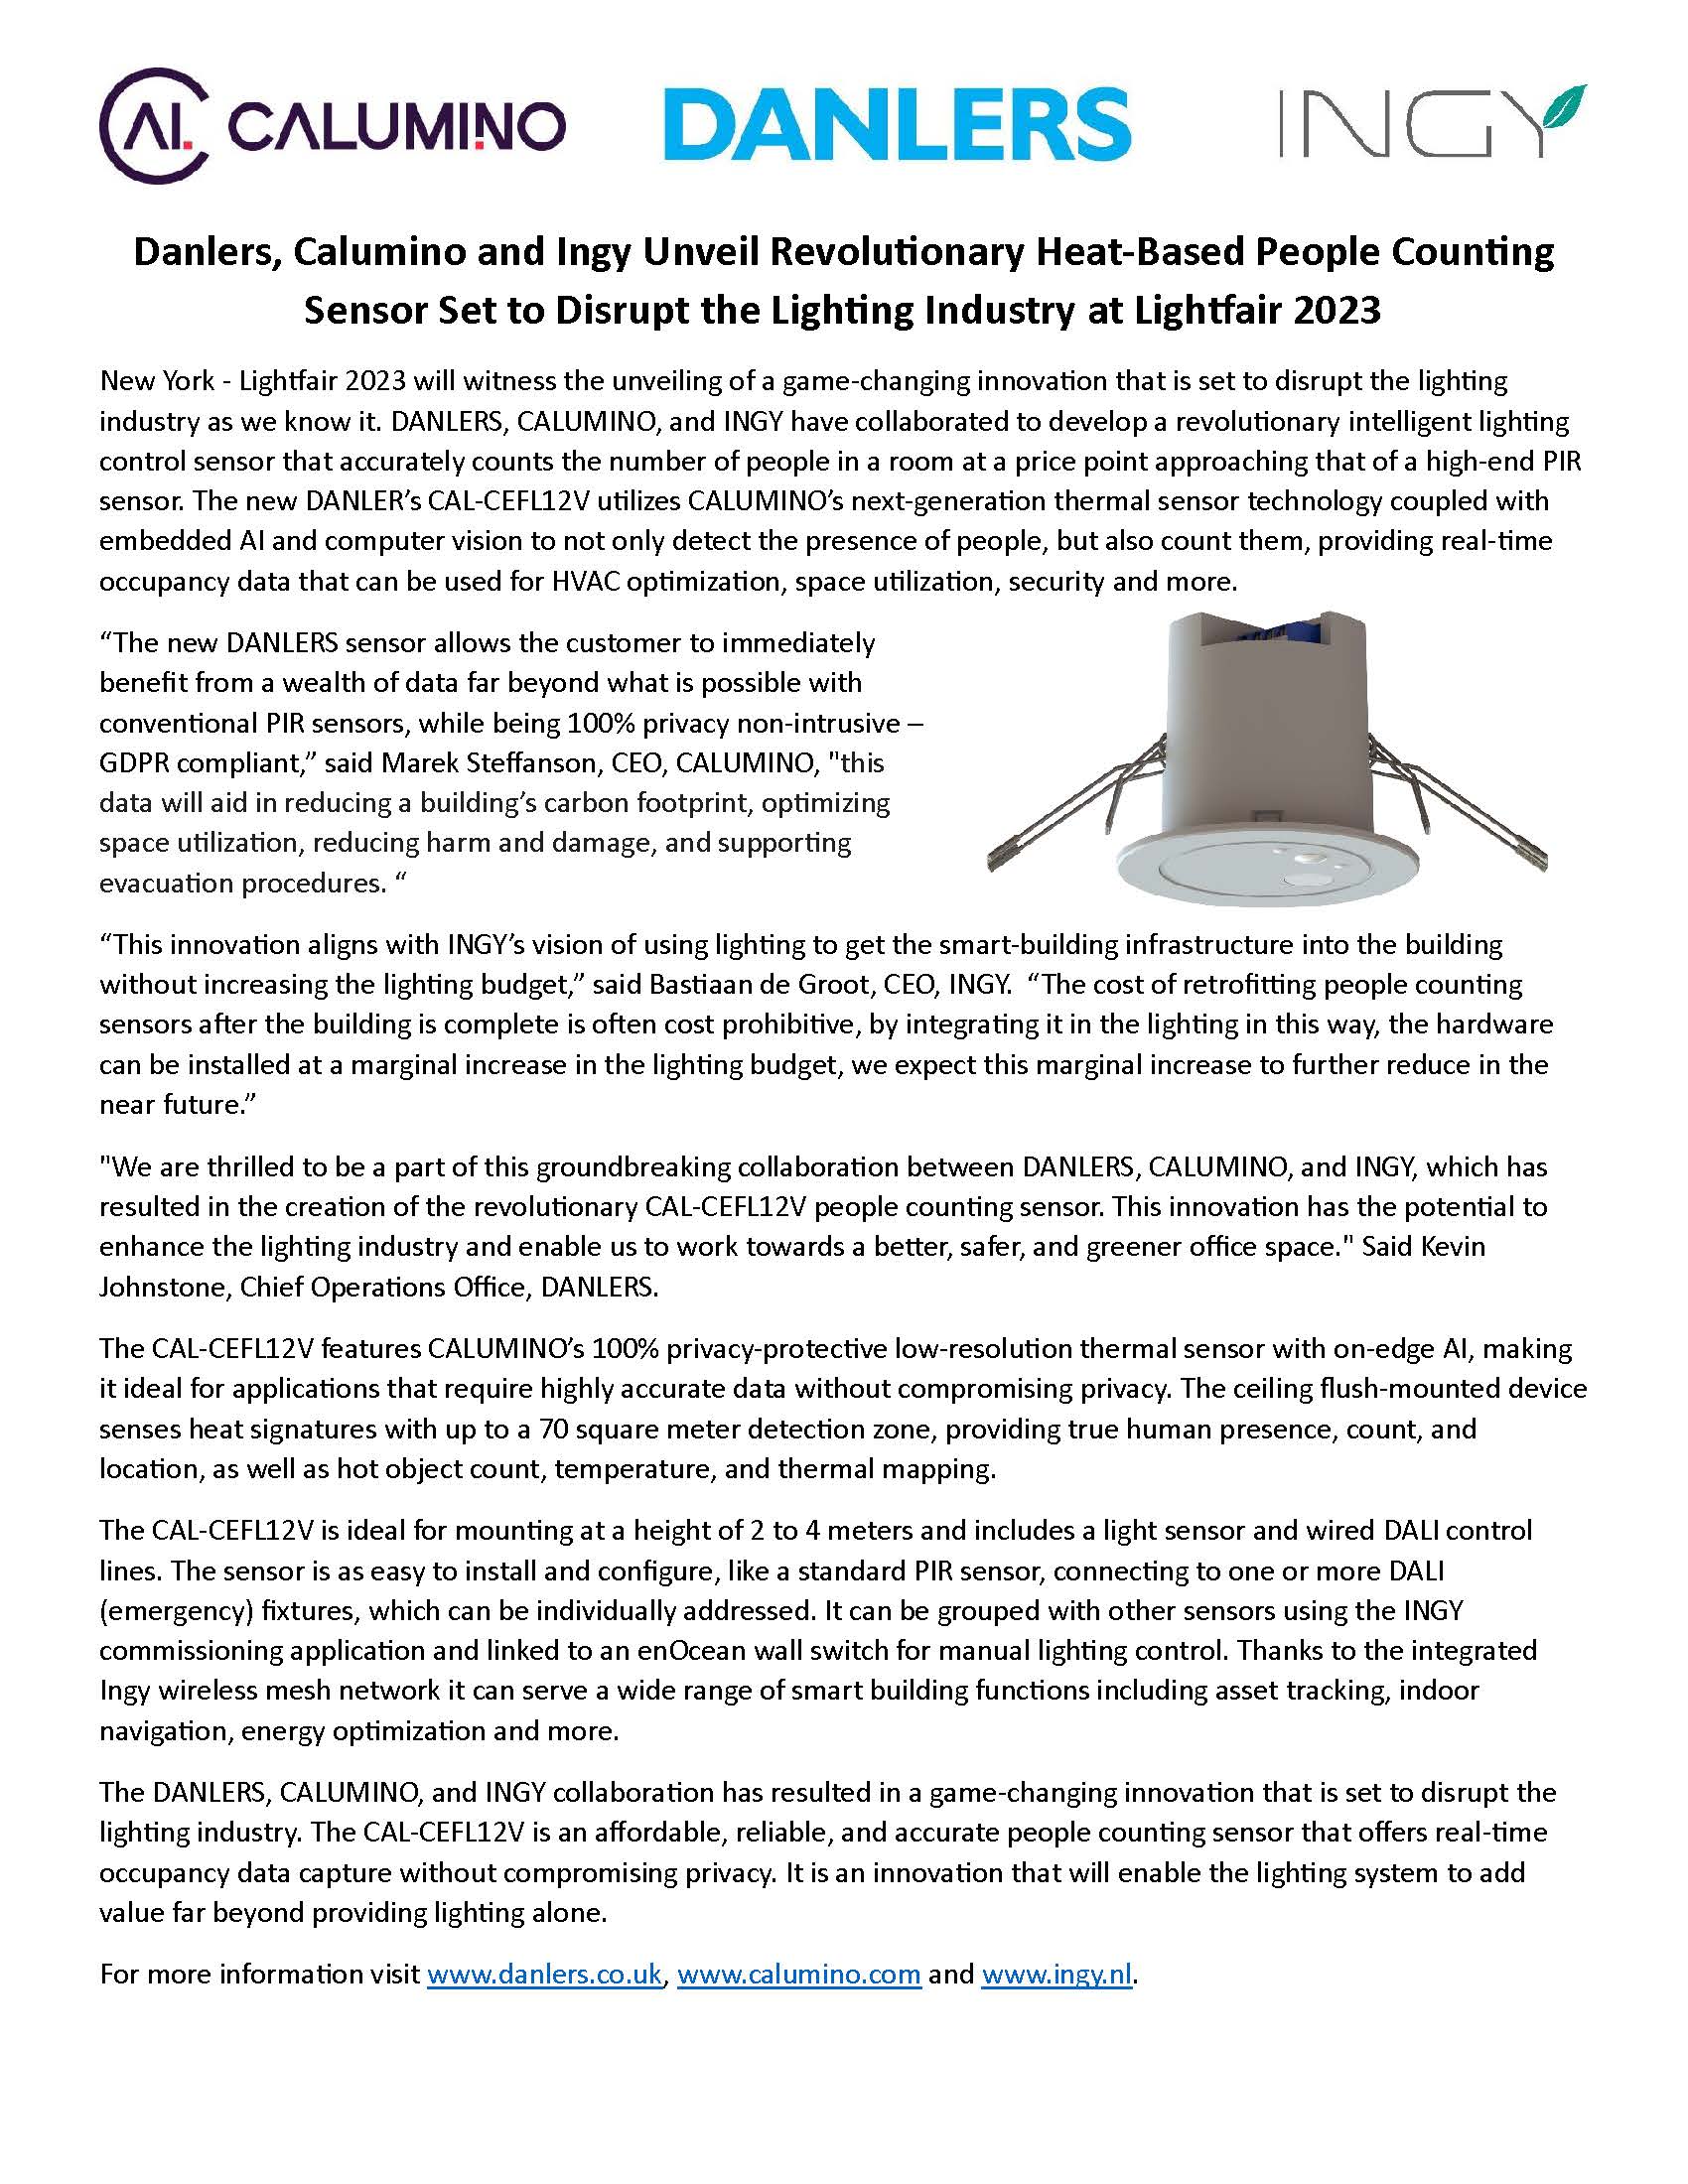 Danlers, Calumino and Ingy Unveil Revolutionary Heat-Based People Counting Sensor Set to Disrupt the Lighting Industry at Lightf